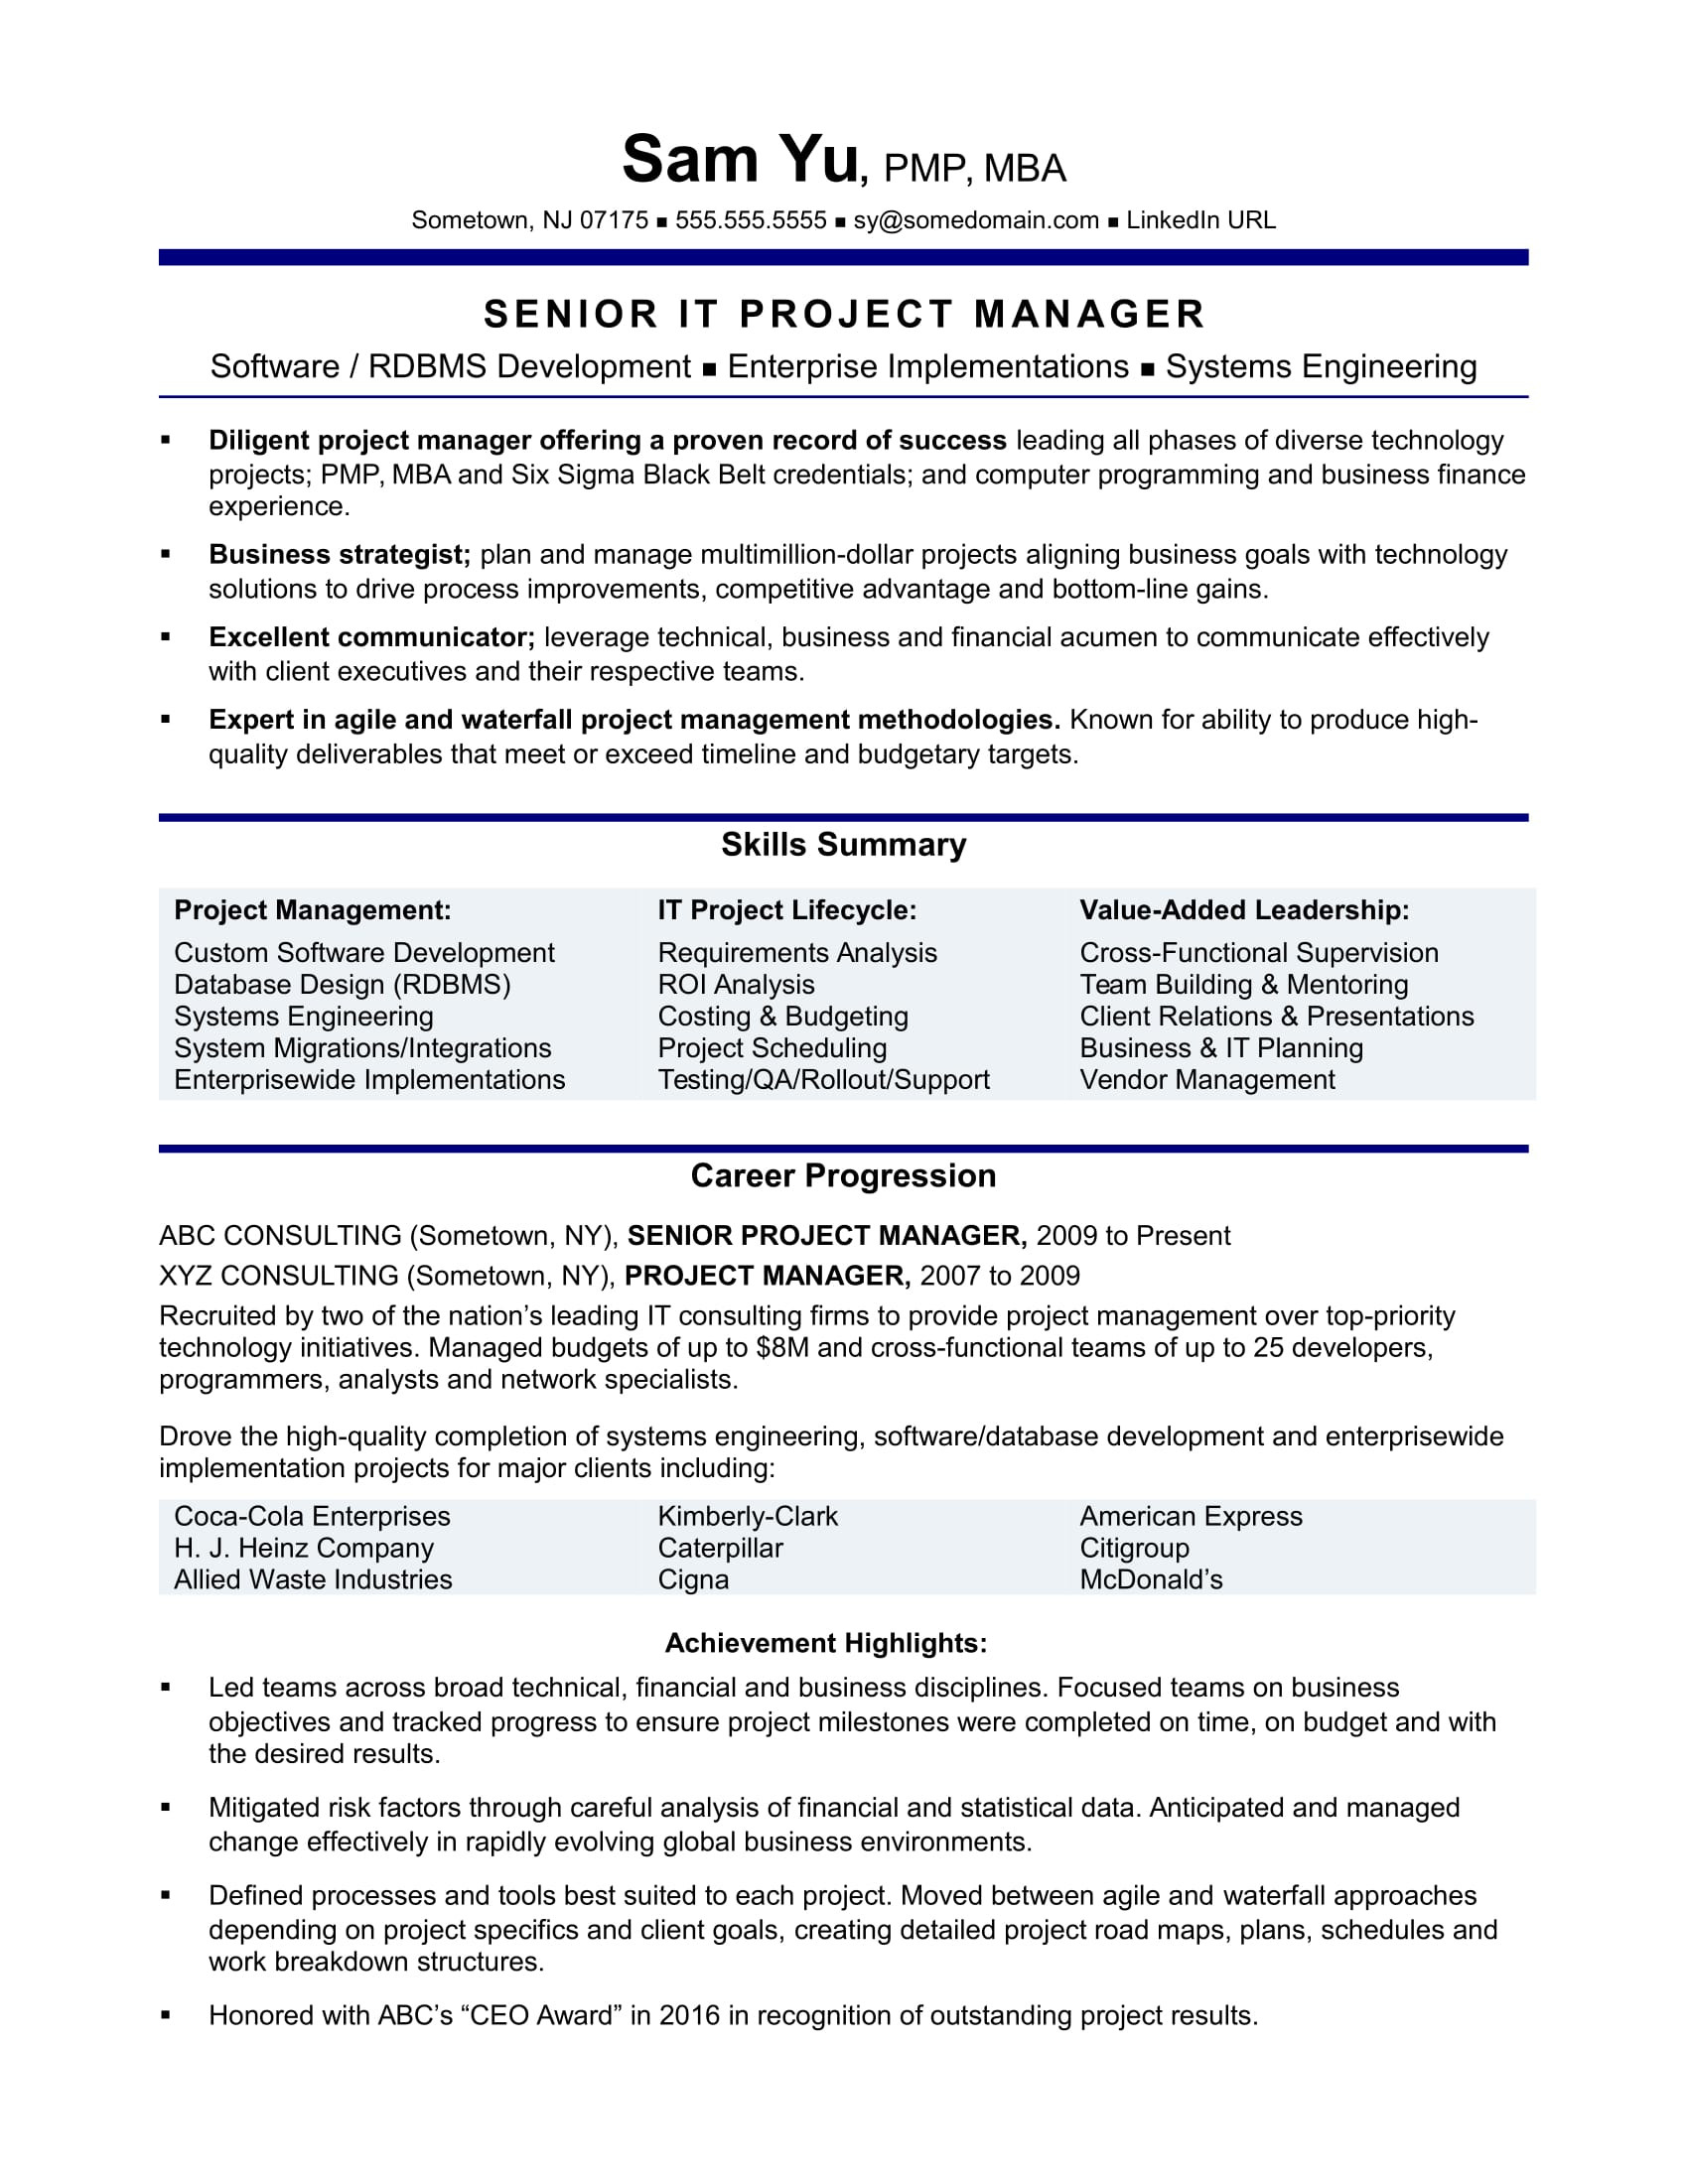 Software Project Manager Resume Achievements Sample It Project Manager Resume Monster.com